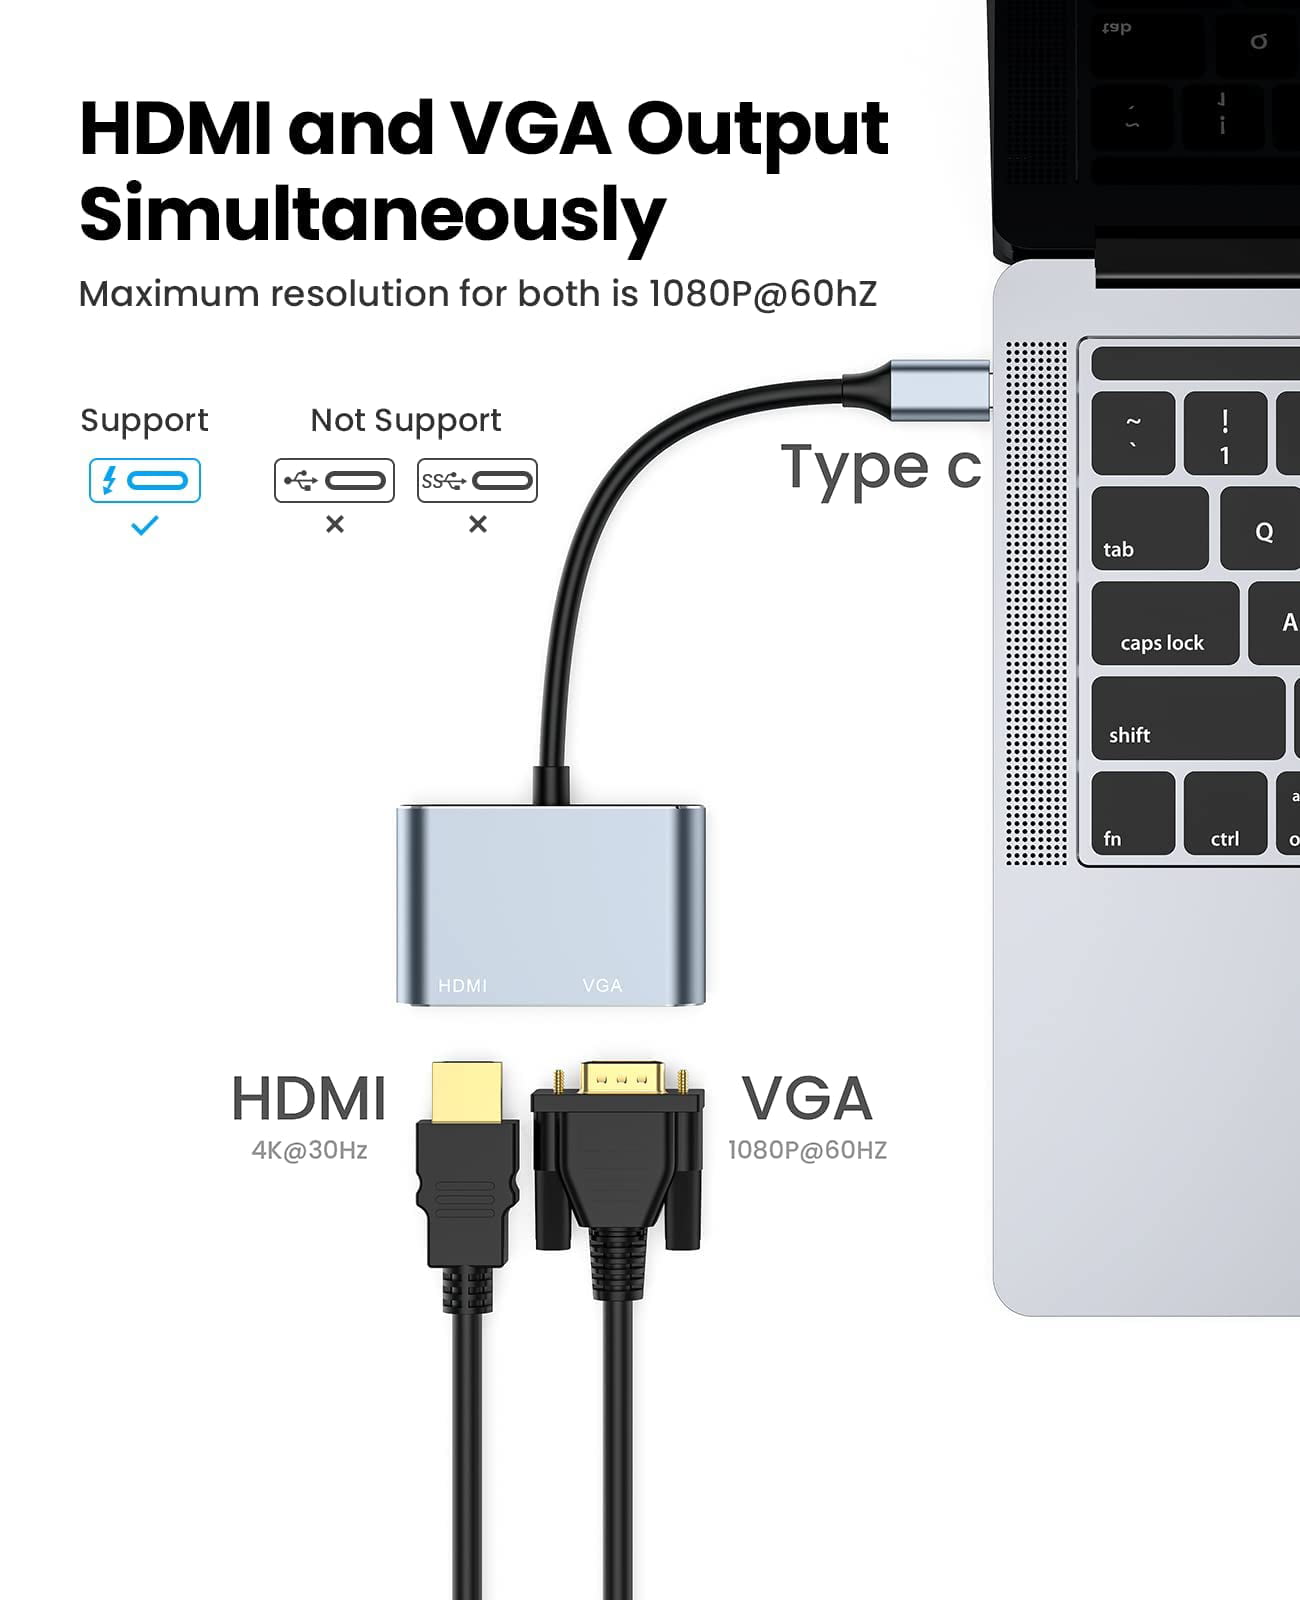 USB C to 4K HDMI-compatible VGA Adapter 4-in-1 Hub USB 3.0 OTG Charging  Power PD Port Compatible for MacBook Pro/Dell XPS/Samsung Galaxy 